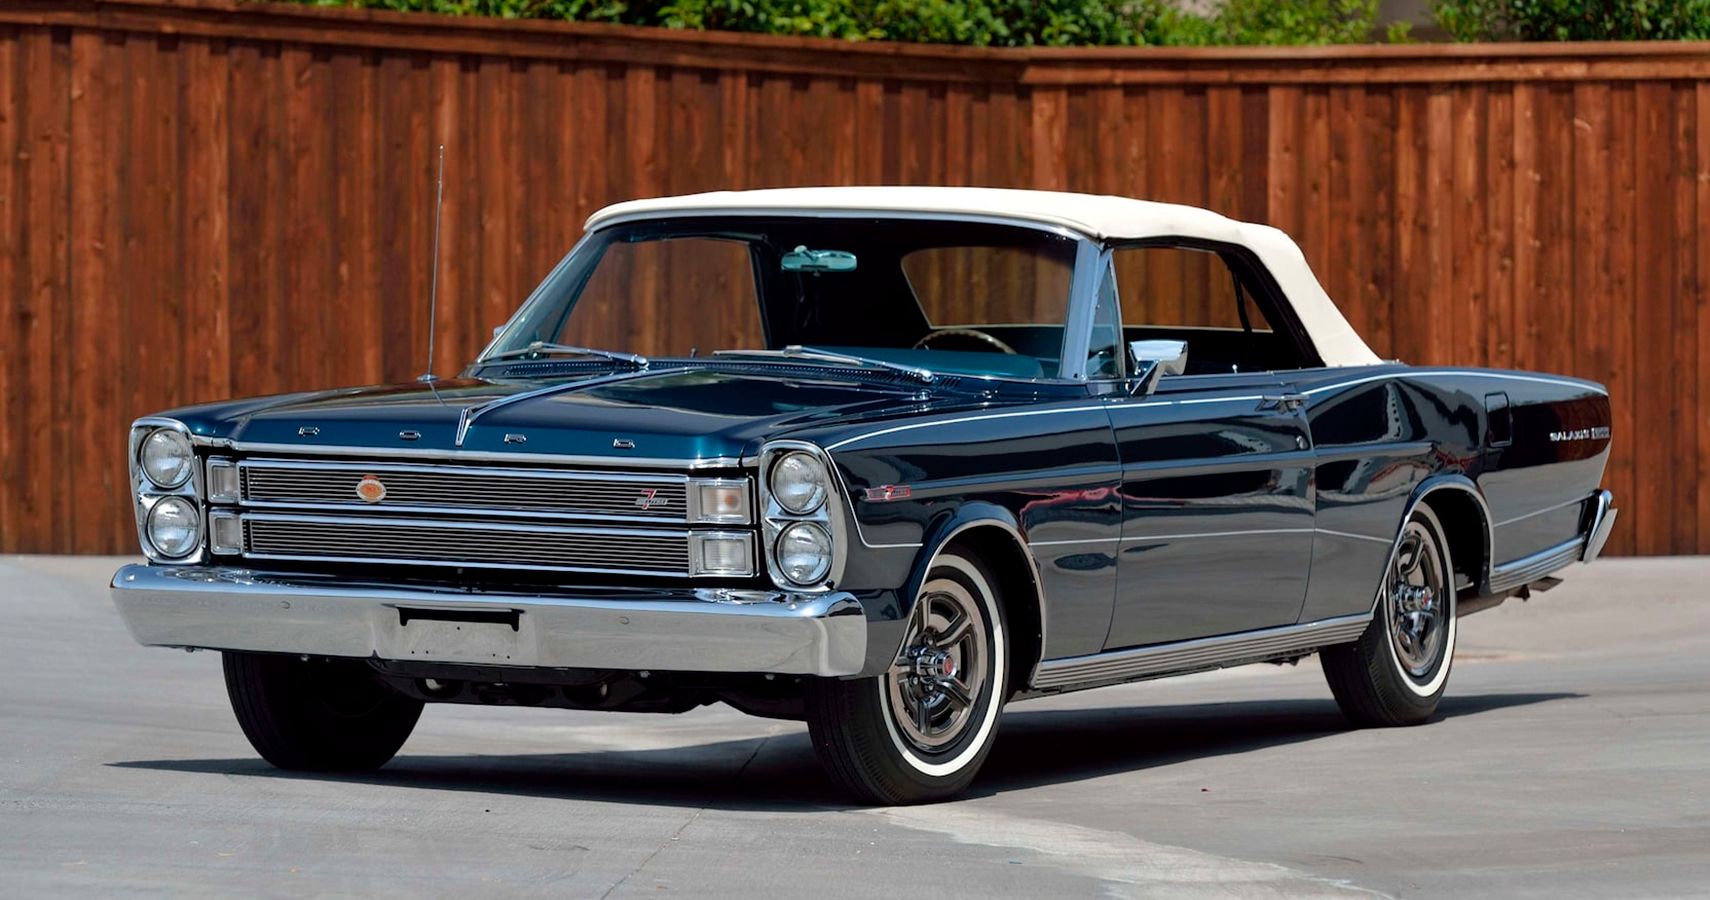 Let’s Power Up: 1966 Ford Galaxie 500 7-Litre